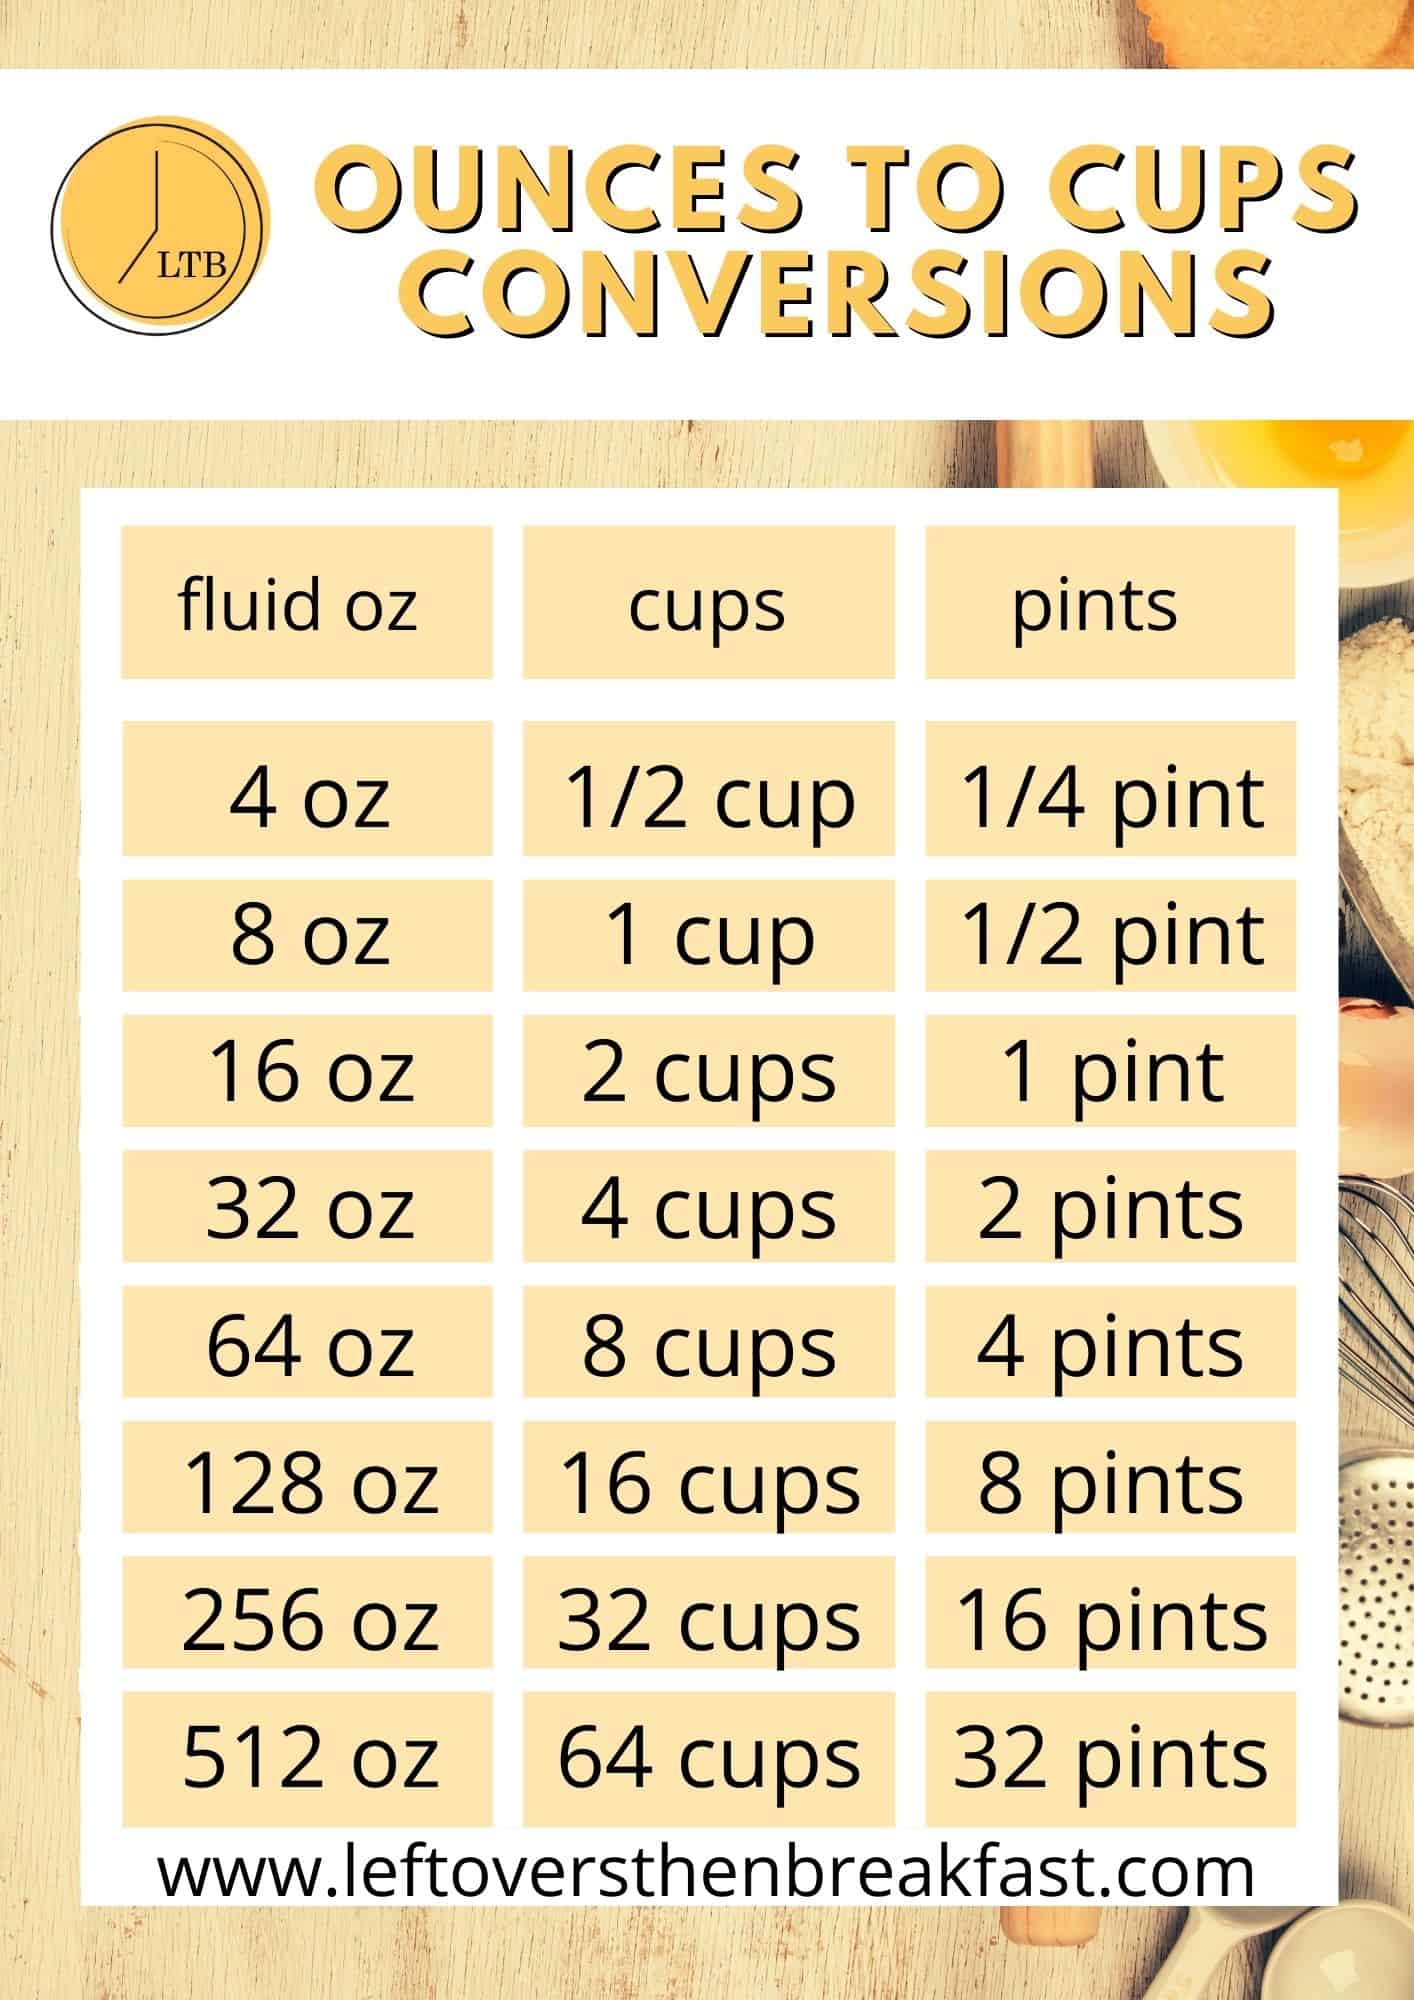 How many Ounces are in a Cup?